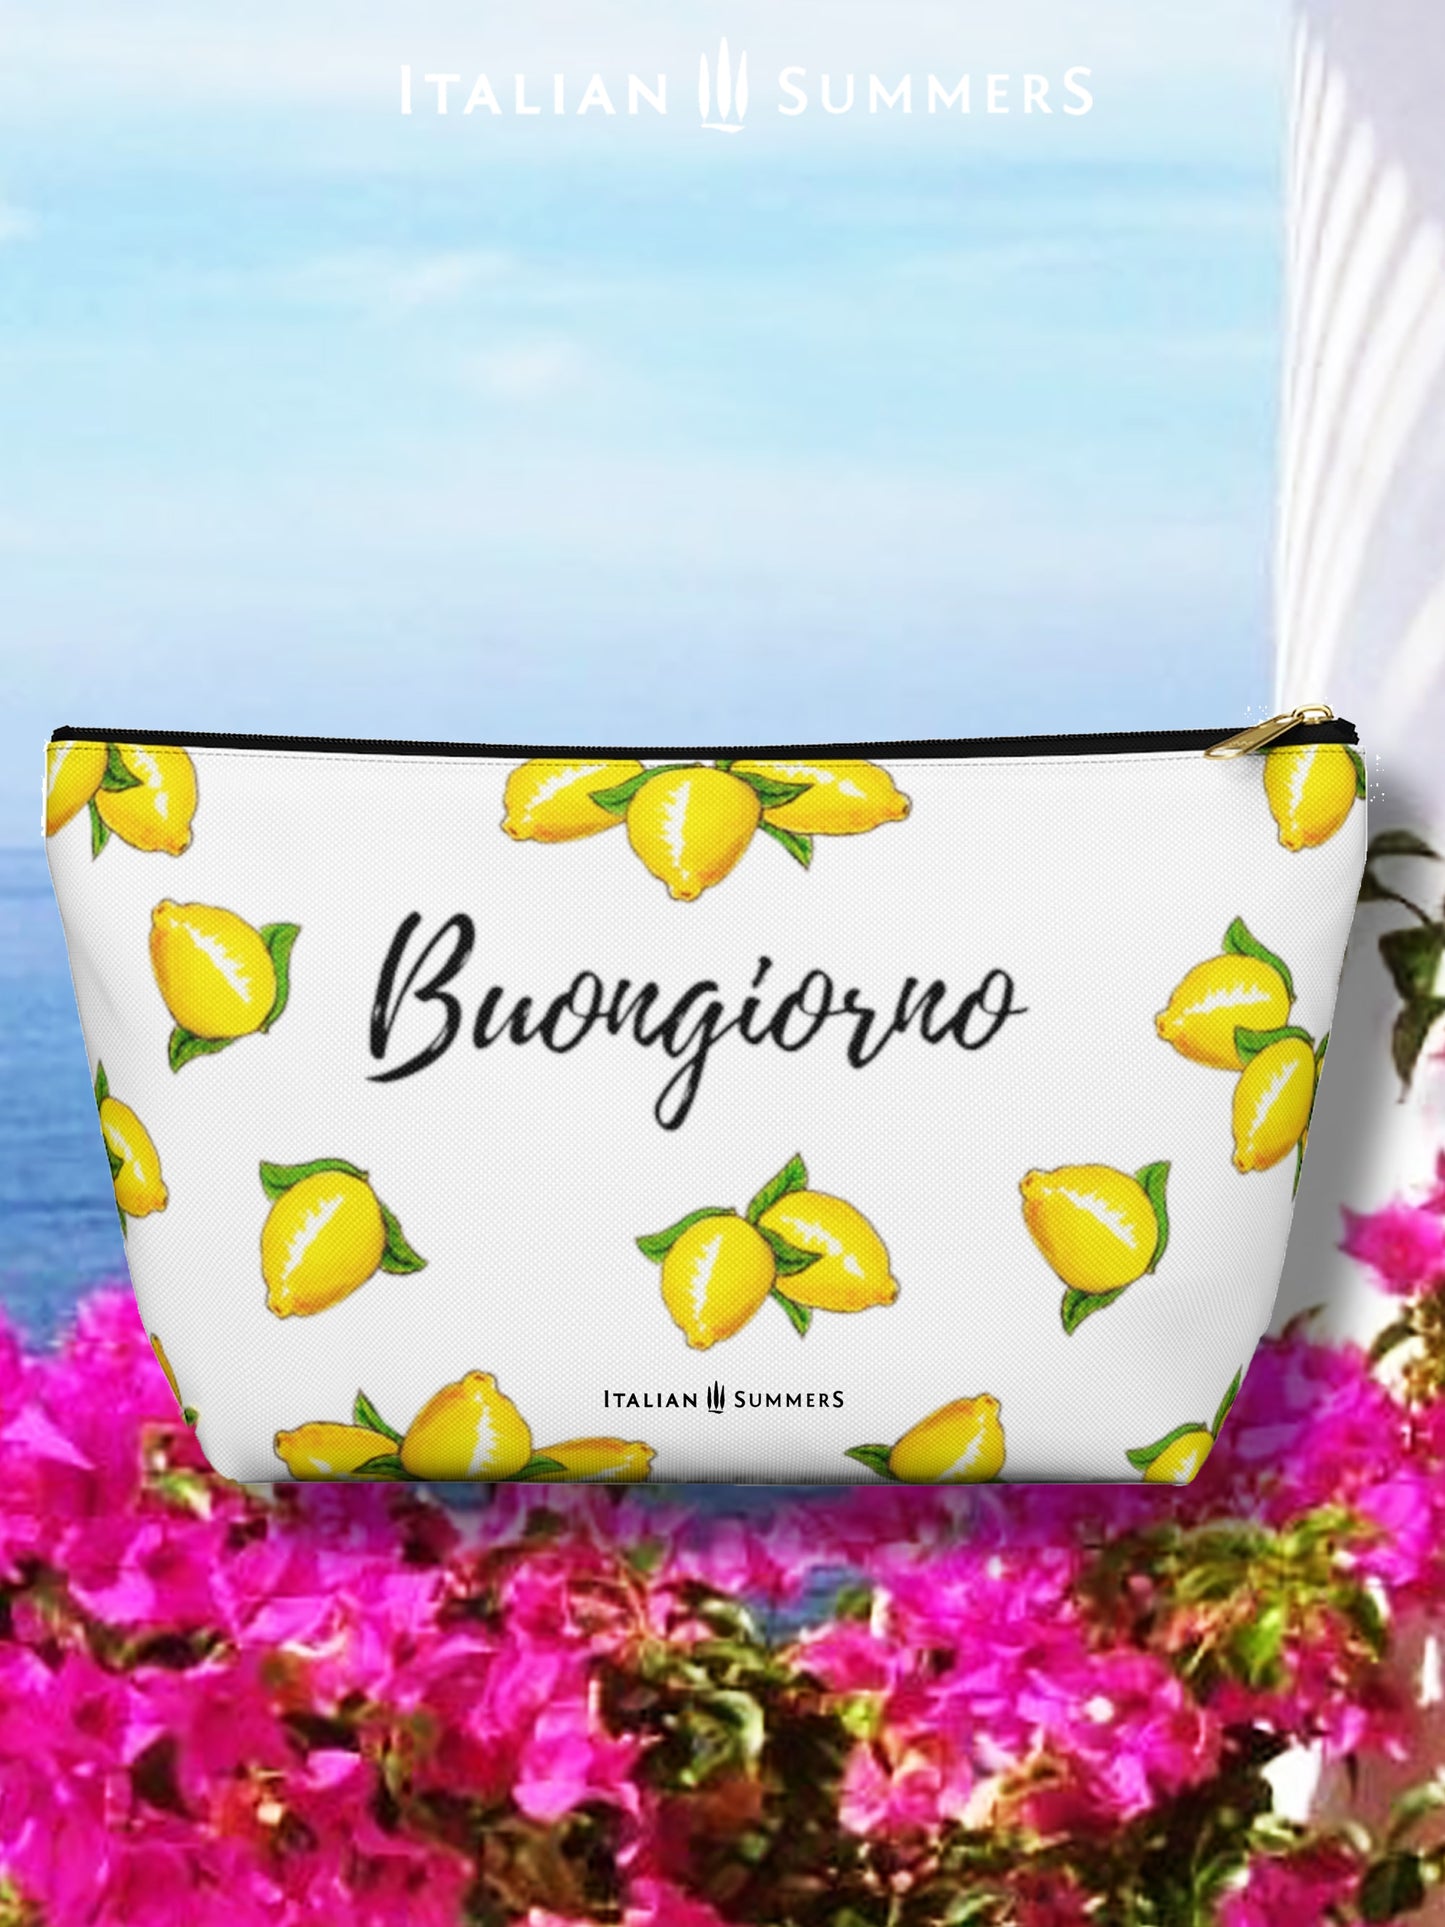 clutch BUONGIORNO LIMONI. Inspired by the sunny, Mediterranean vibes of Italy, this clutch is decorated with playful, happy Sorrento lemons and the classic Italian greeting of "Buongiorno".